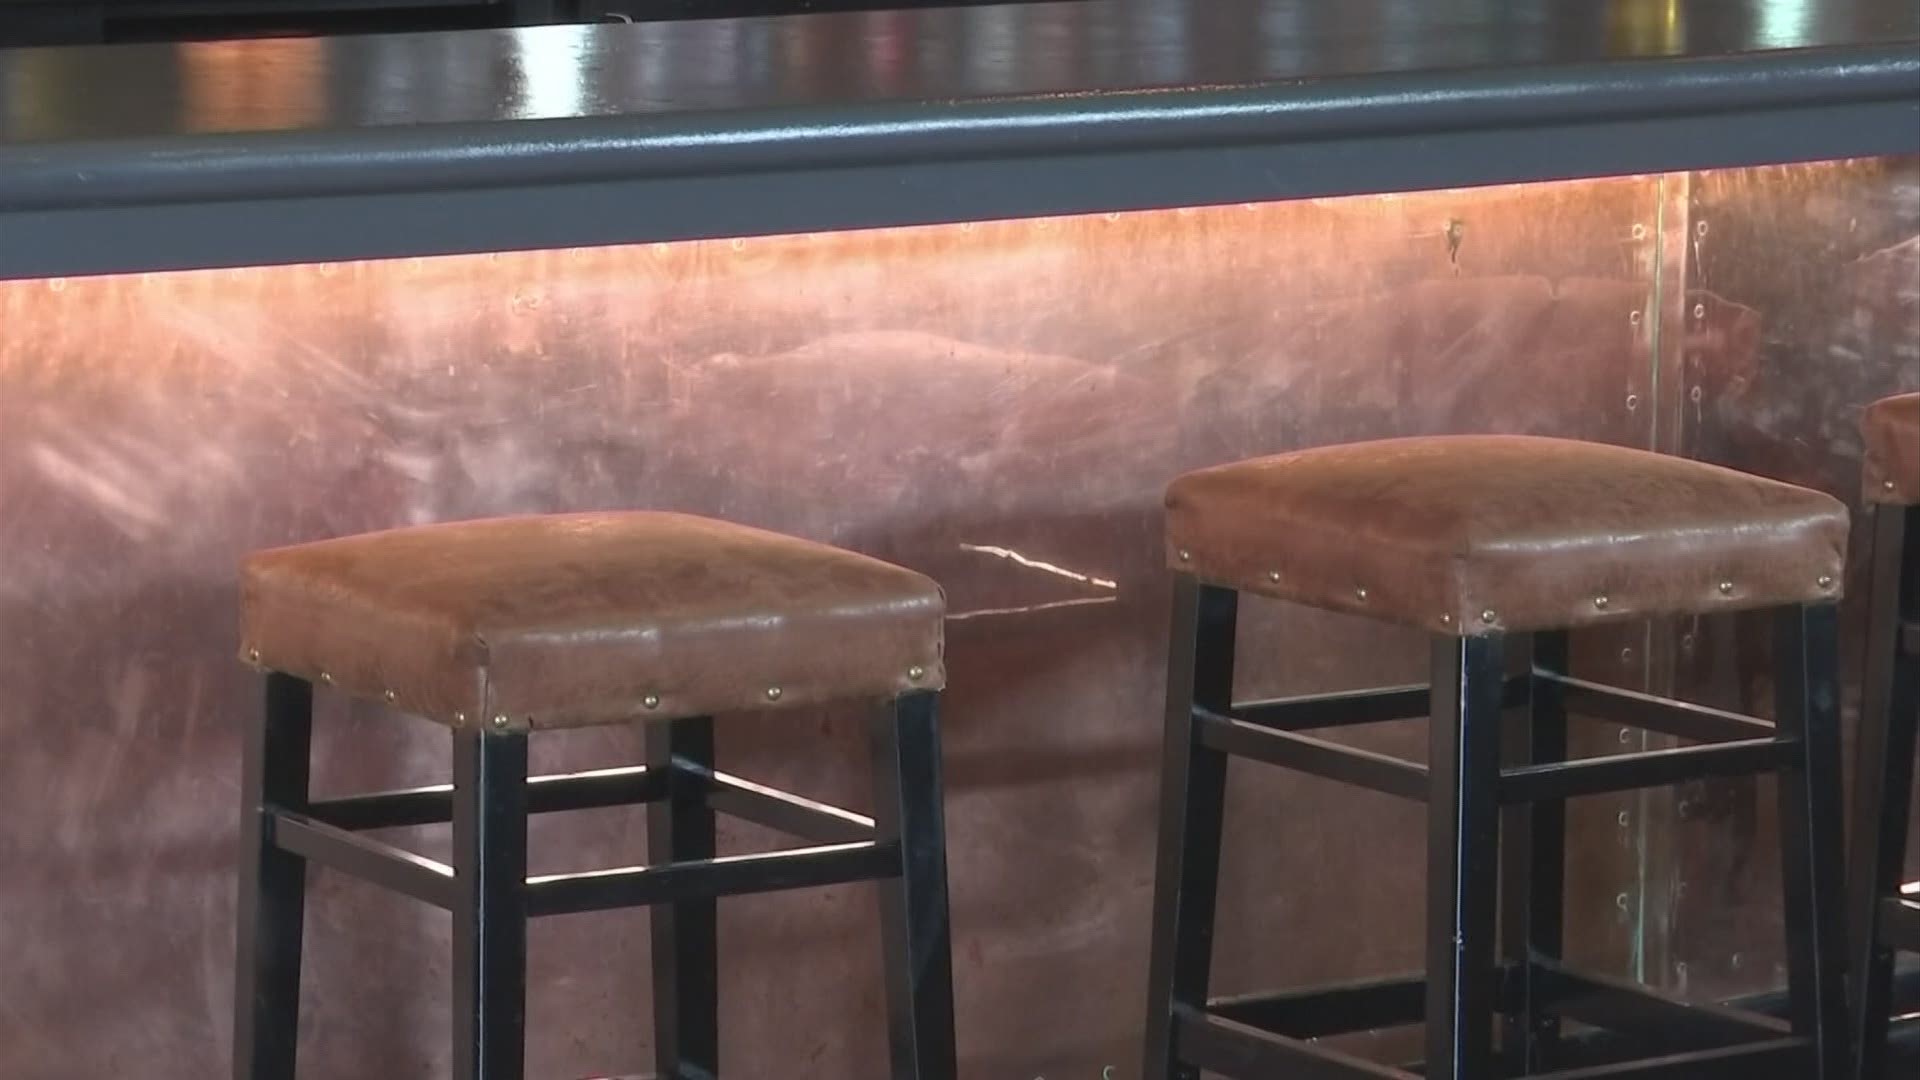 Restaurant and bar owners say they feel they've gone above and beyond what they can do to keep their customers safe.